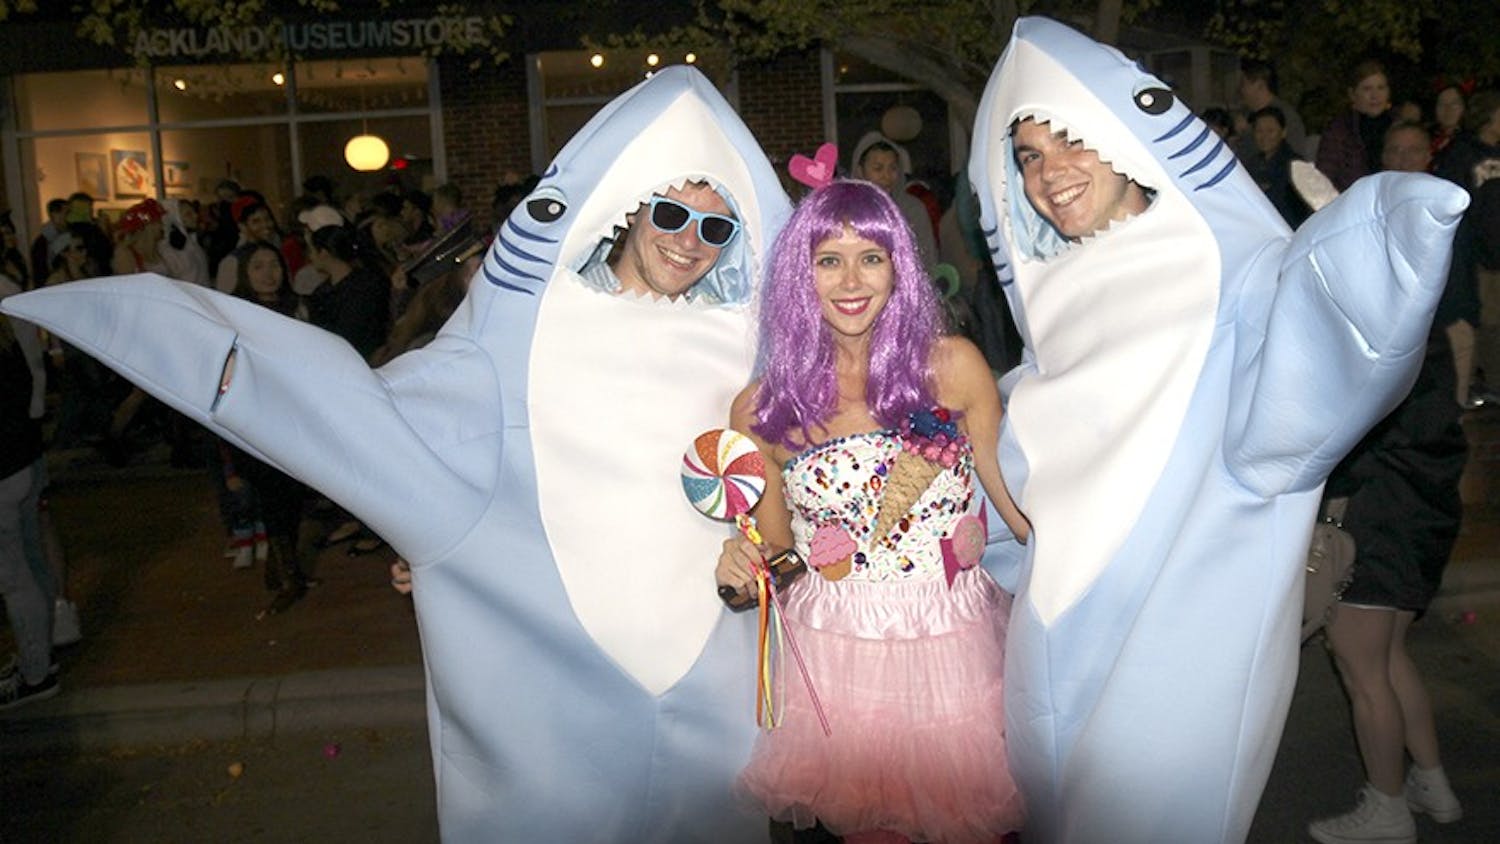 Halloween festivities on Franklin Senior Gary allen (Exercise of Sports), Holli Mattocks from Durham and Freshman Josh Mattocks (Biology and Philosophy double major) dressed up as Katy Perry and her two shark dancers from her 2015 Super Bowl performance.